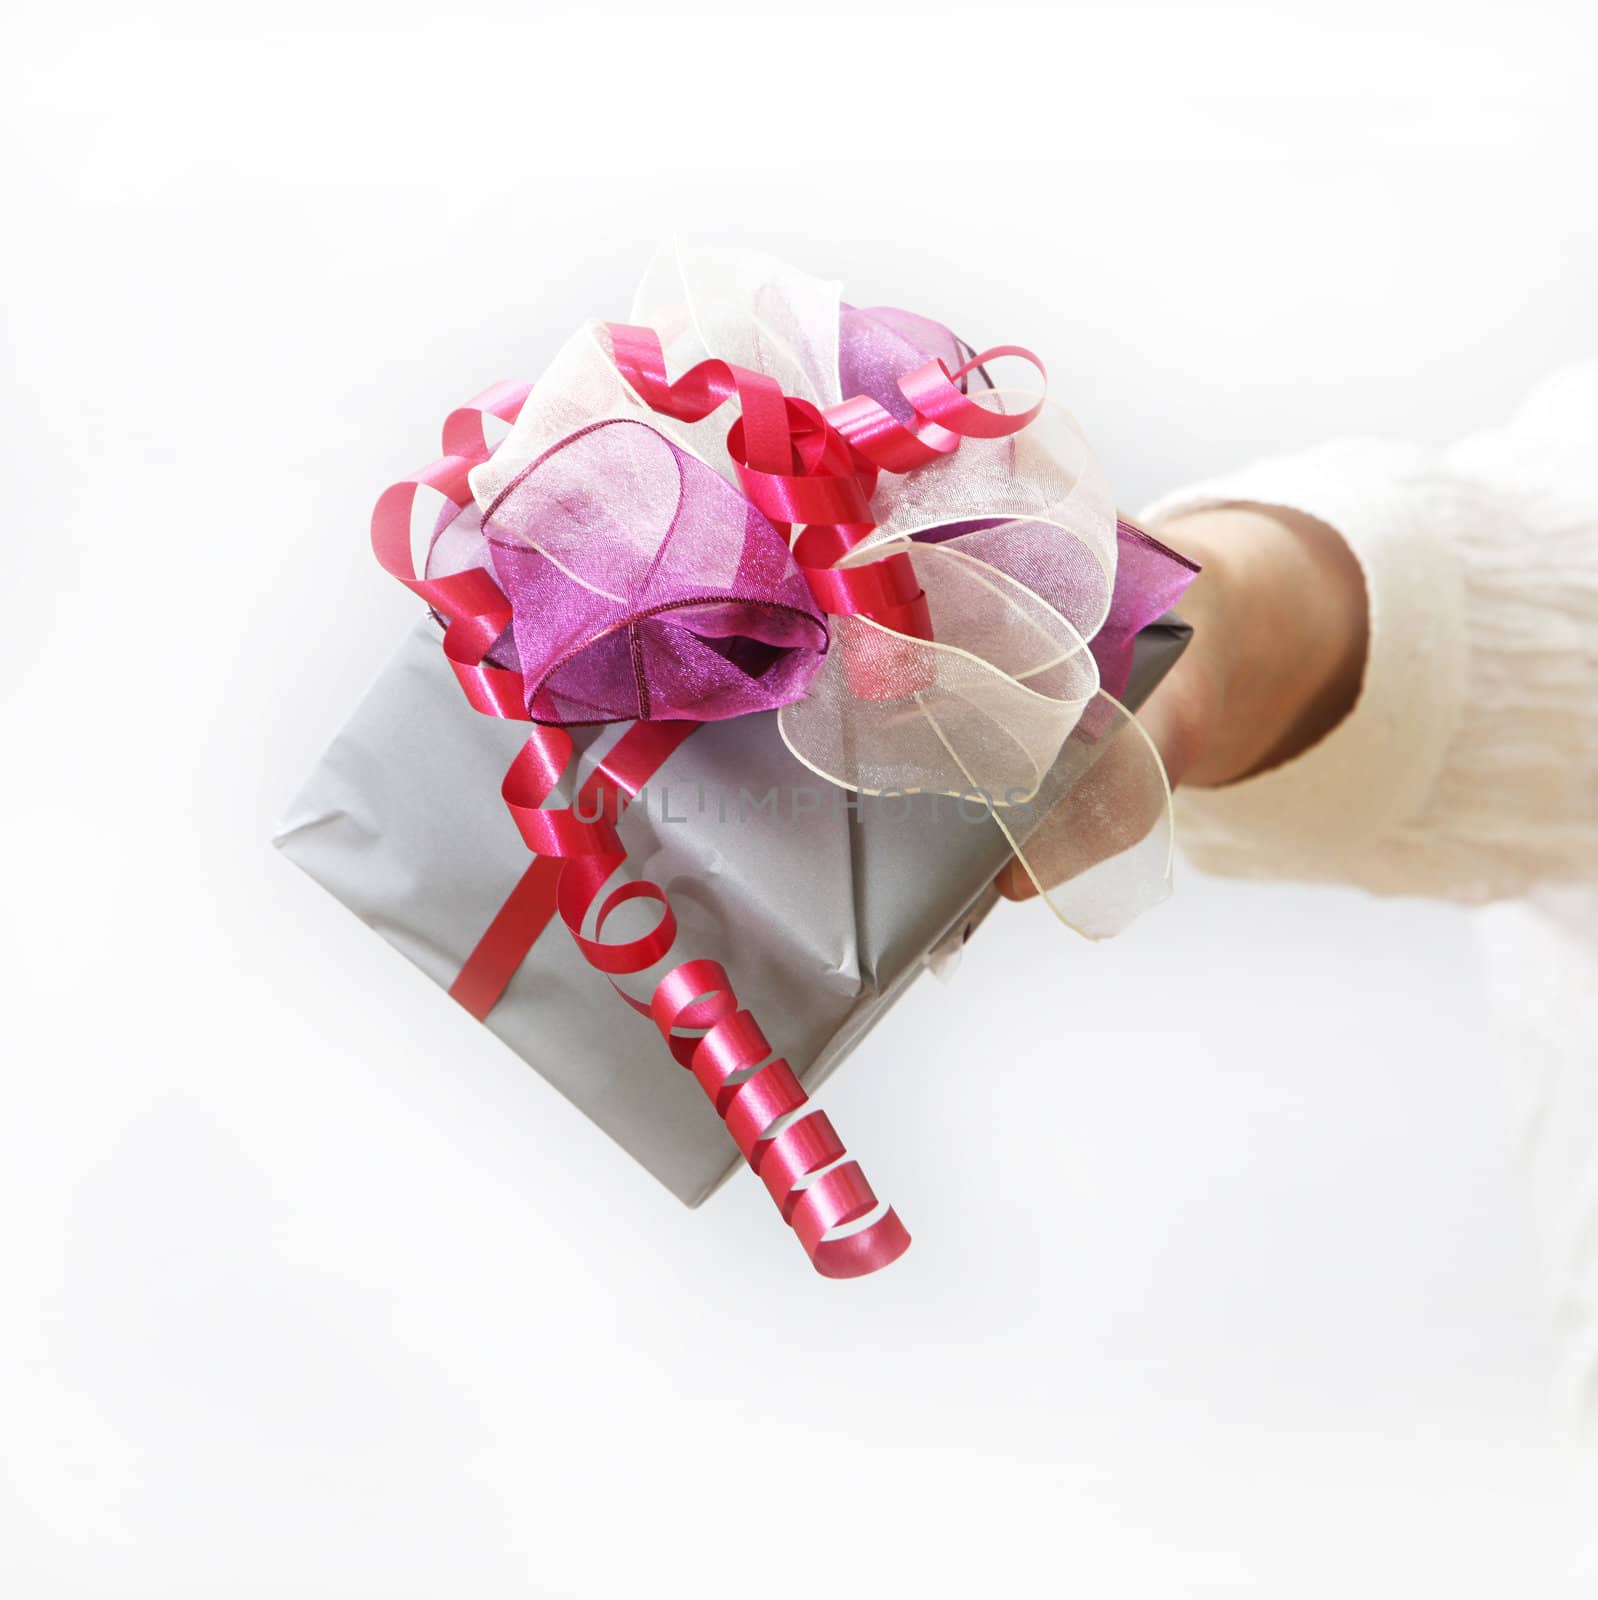 Woman shows nice gift with bow - white background

